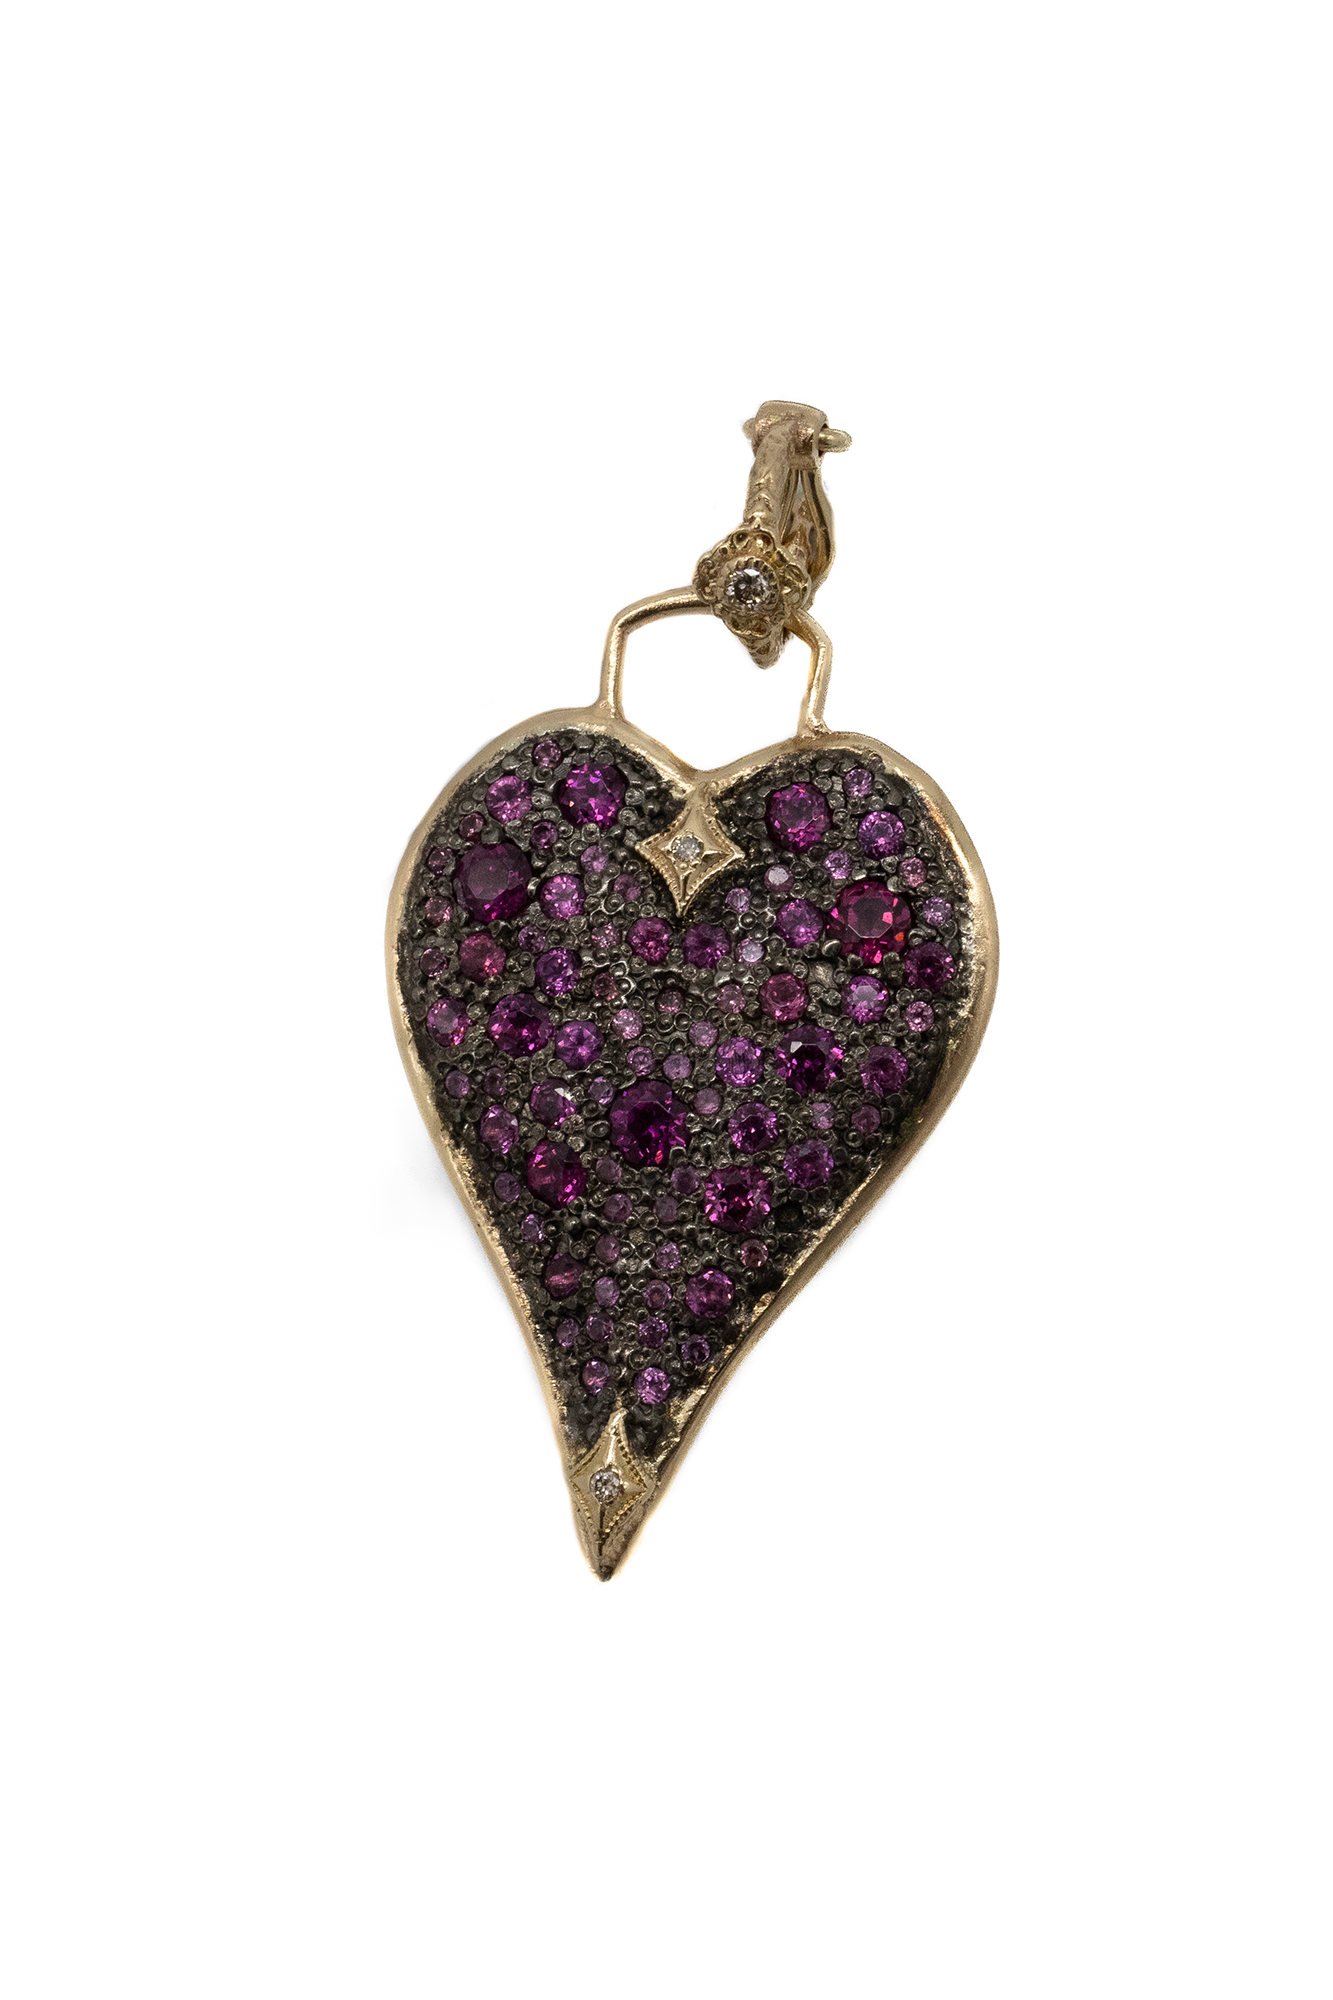 This sophisticated enhancer crafted from 14K Yellow Gold and Gunmetal Sterling Silver from Armenta is a unique accessory that will add an elevated touch to any look. Its 30mm heart shield is adorned with a sparkling champagne diamond and pave rhodolite accents. Perfect for any occasion.